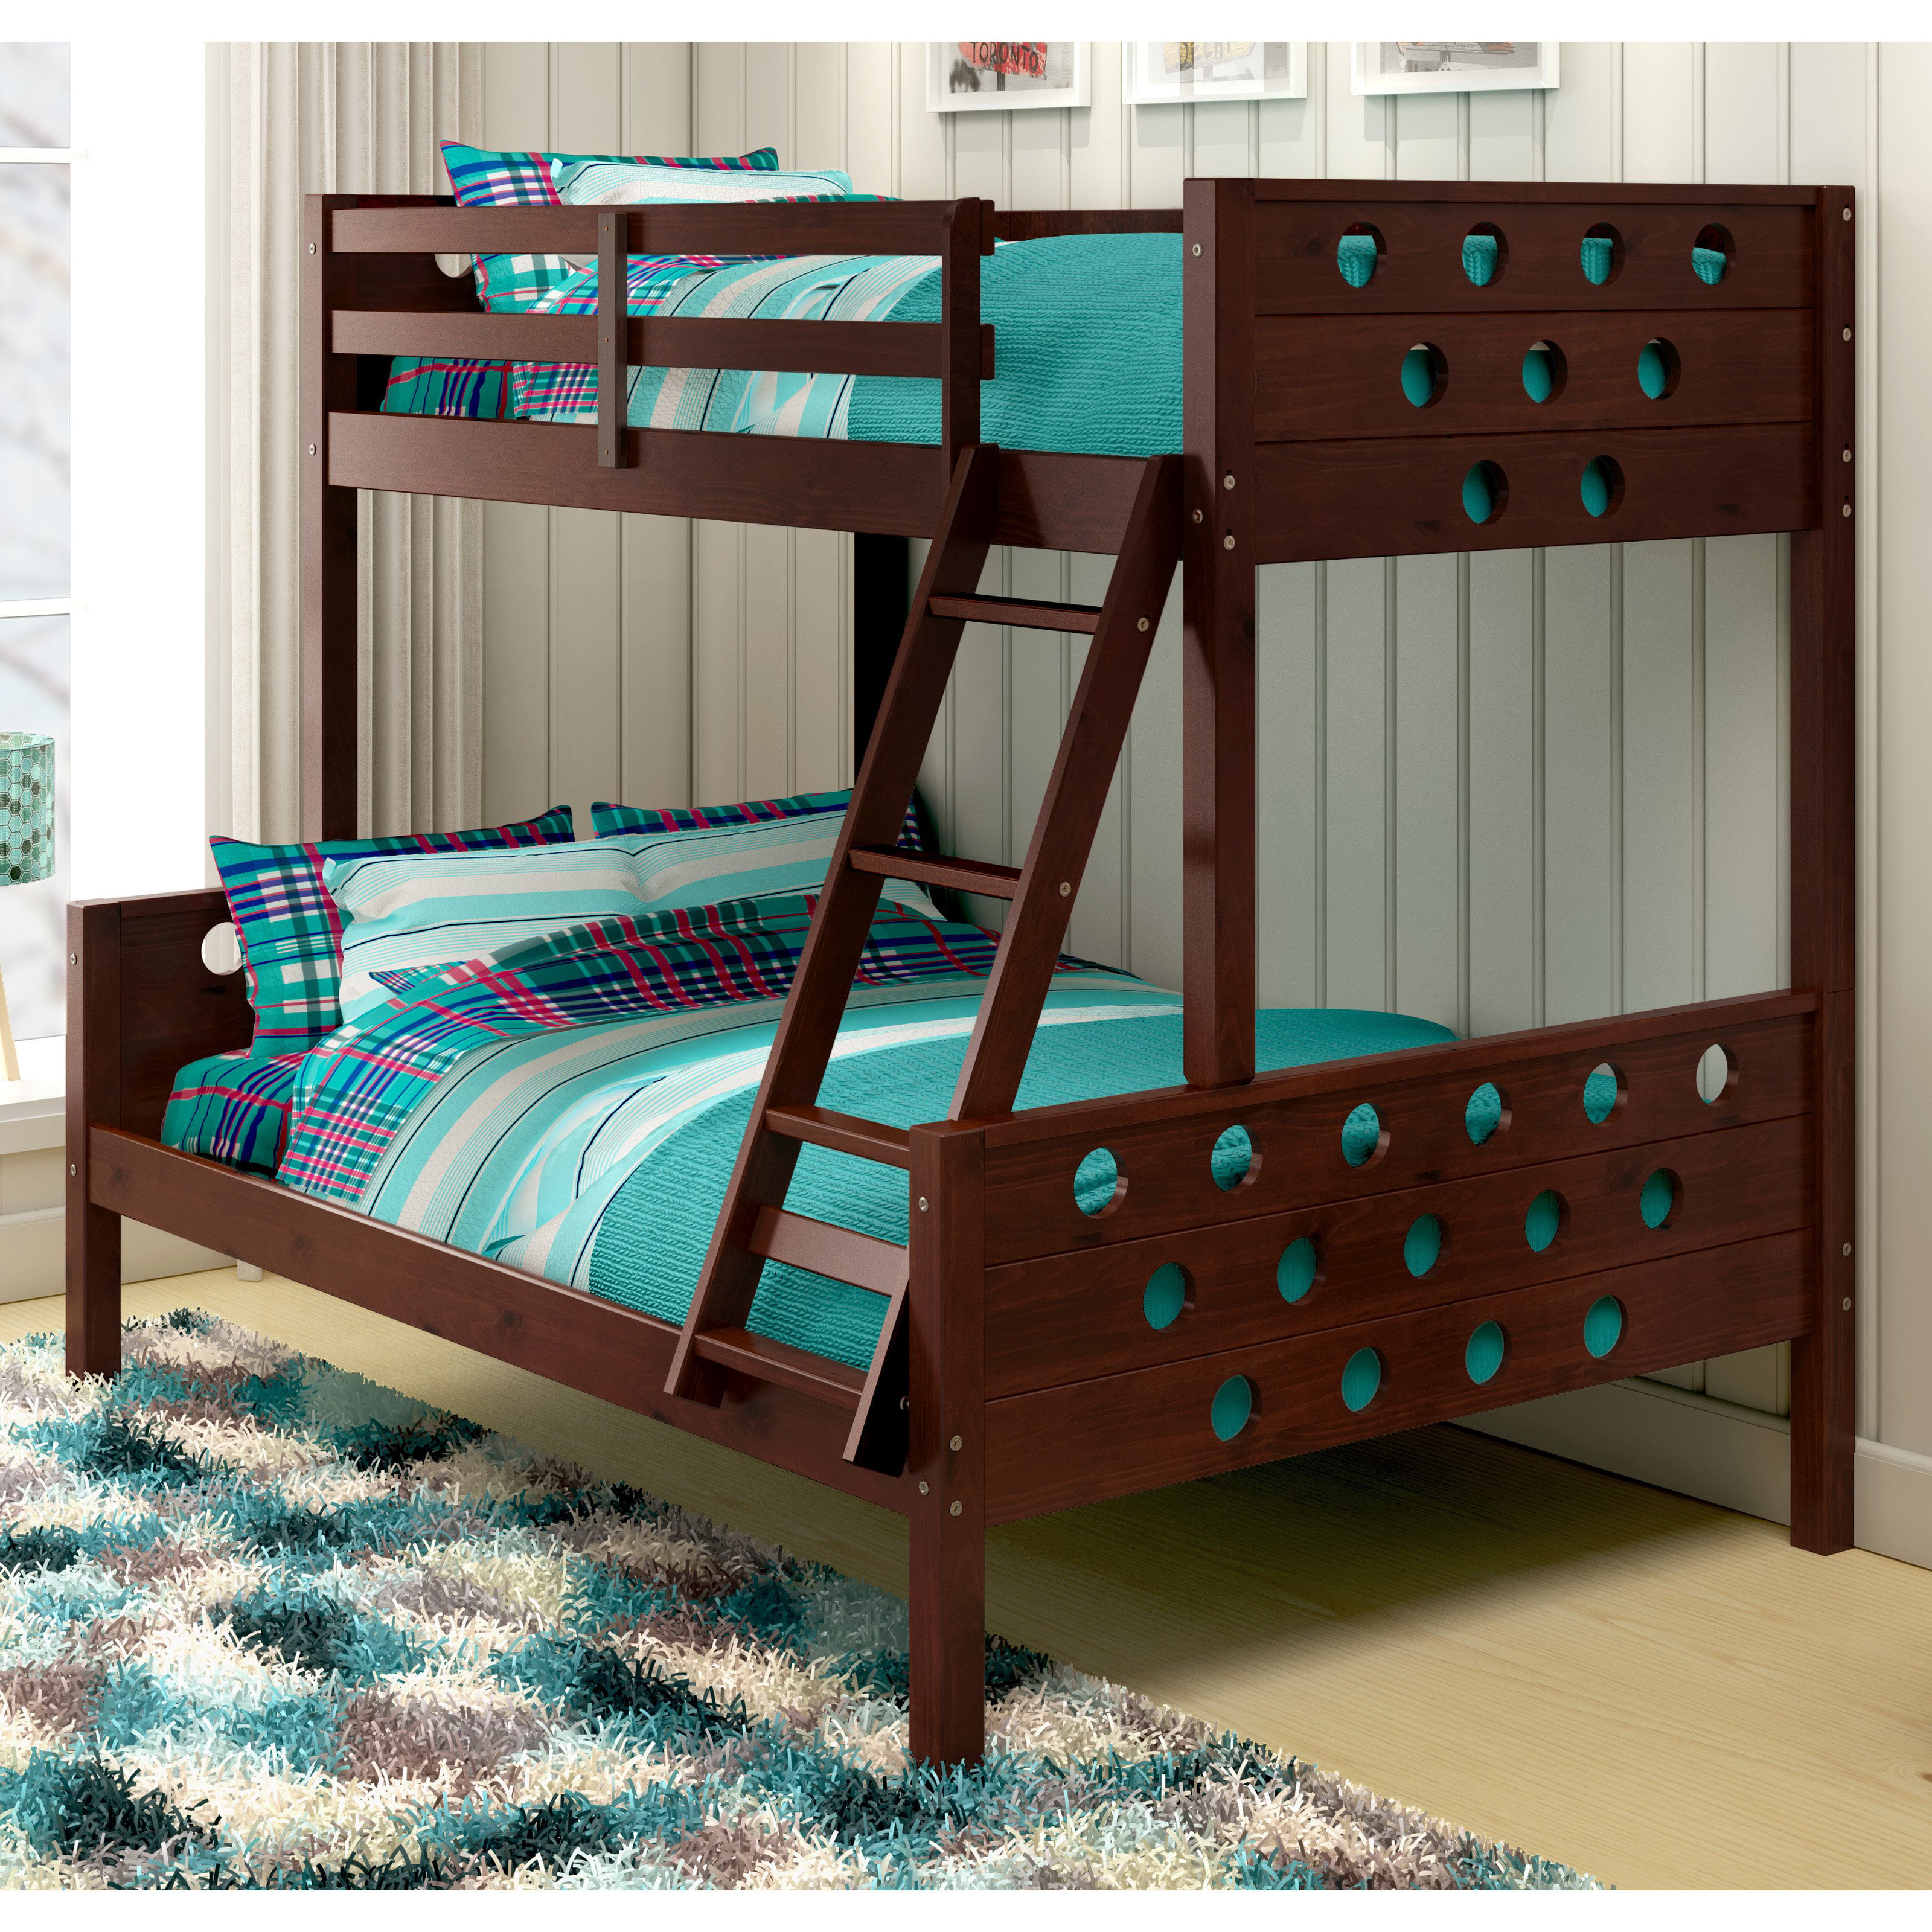 Donco Circles Twin Over Full Bunk Bed, Merlot Twin Over Full Bunk Bed